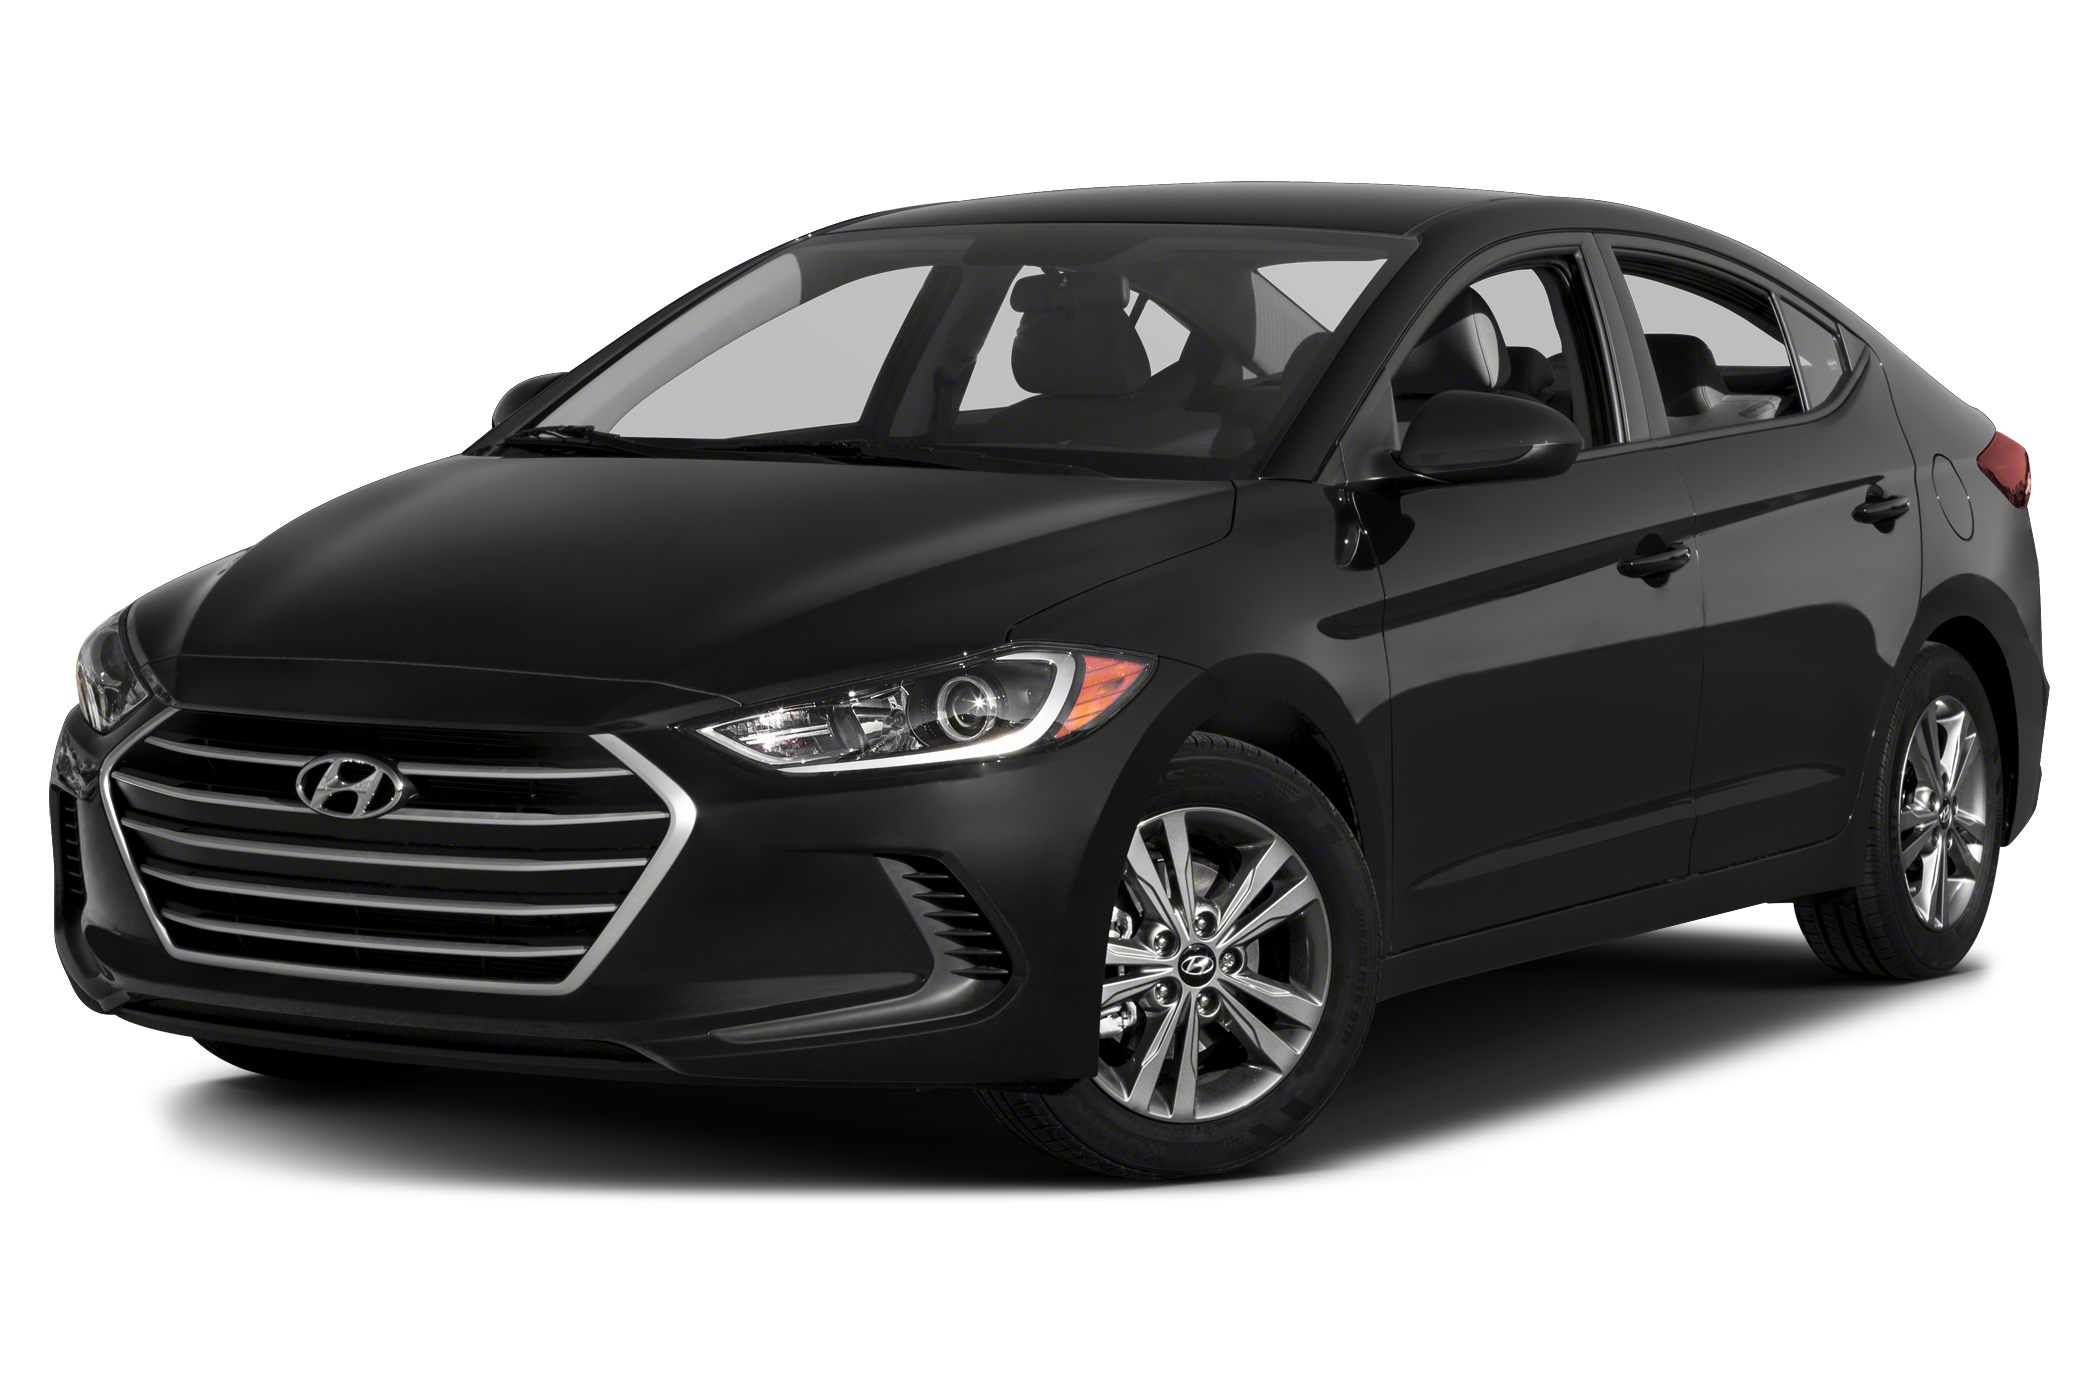 Hyundai Elantra Car Mileage, Engine, Price, Space, Safety and Features